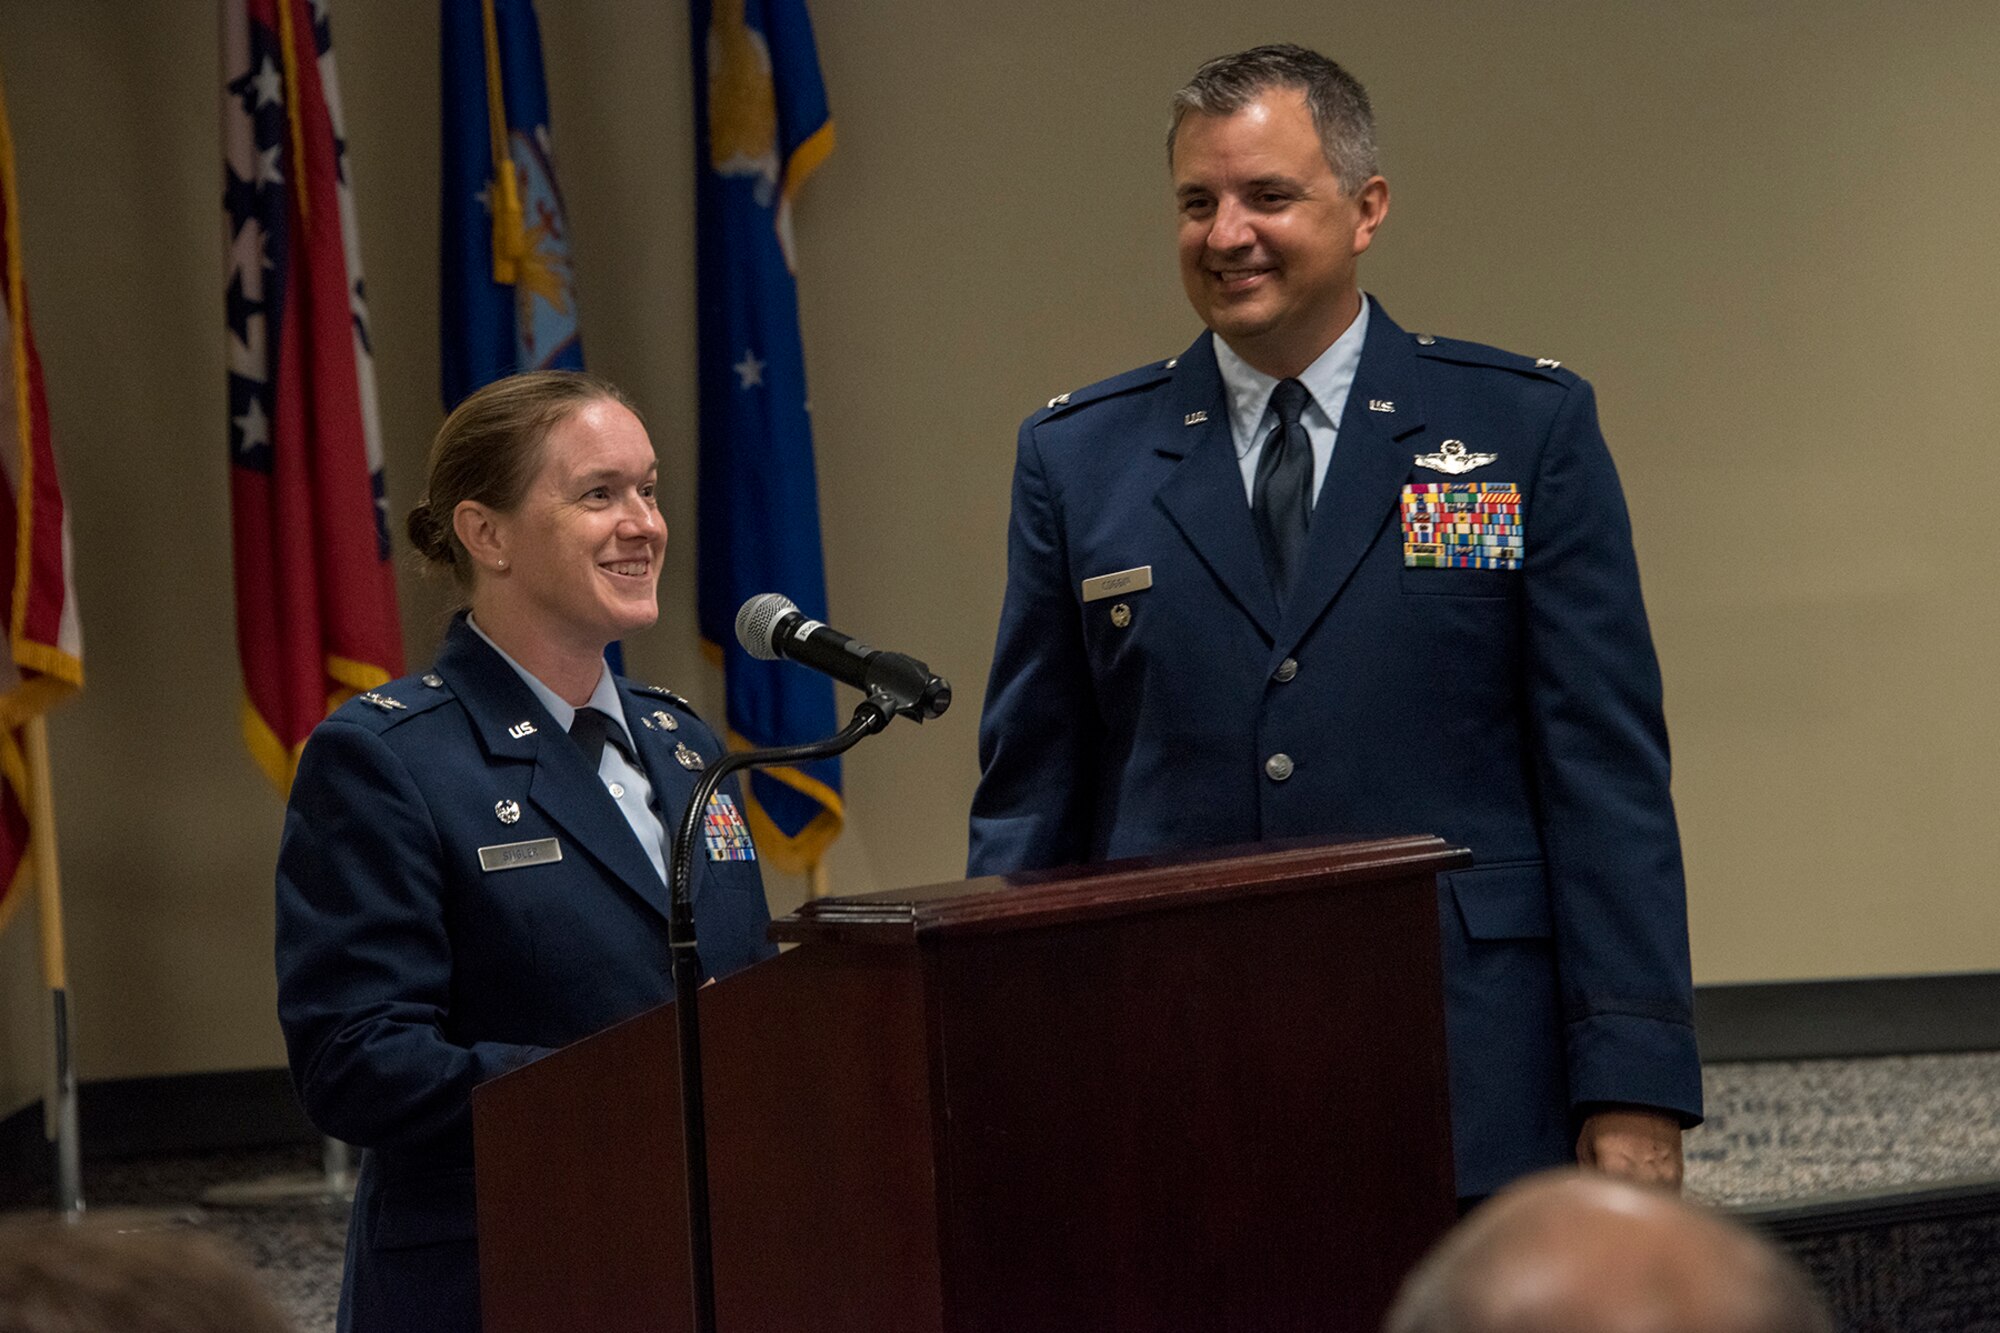 Col. Sara A. Stigler, 188th Intelligence, Surveillance and Reconnaissance Group commander, delivers remarks during a promotion ceremony August 7, 2019, at Ebbing Air National Guard Base, Ft. Smith, Arkansas. The wing promoted Stigler and Patric D. Coggin, 188th Operations Support Squadron commander to the rank of colonel. (U.S. Air National Guard photo by Tech. Sgt. John E. Hillier)